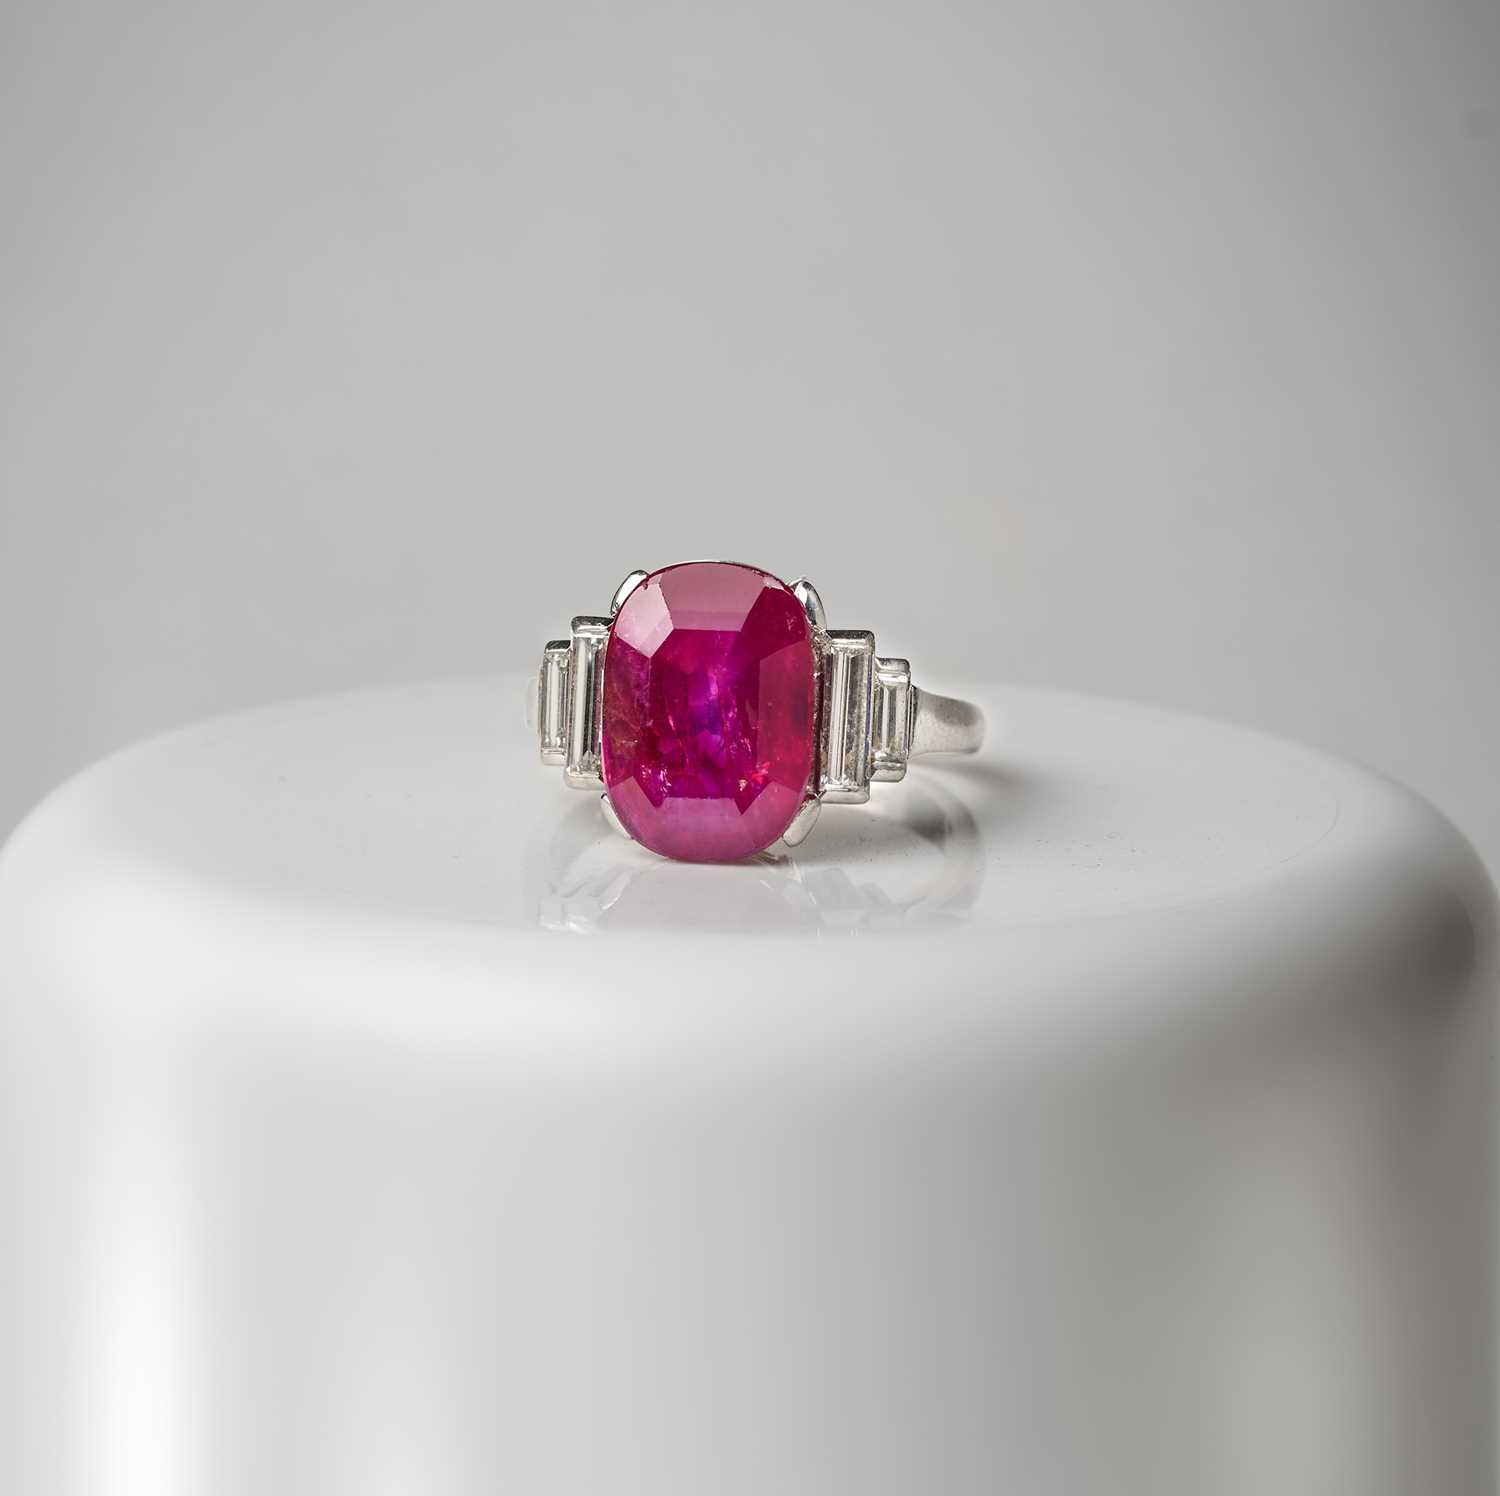 An impressive Art Deco ruby and diamond ring, 1920s, set with a cushion-shaped ruby weighing 5.